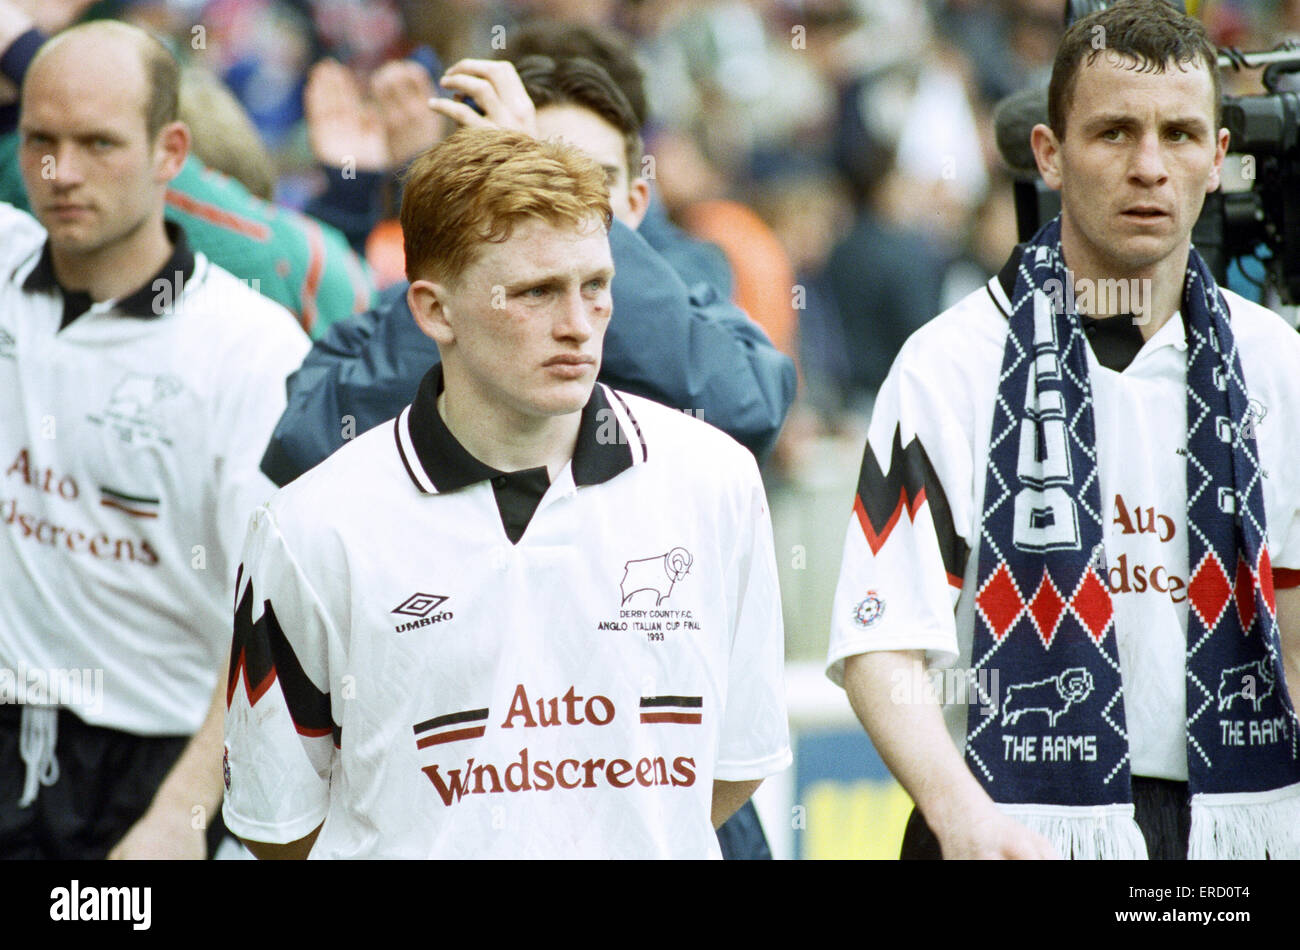 Anglo Italian Cup Final at Wembley Stadium. Derby County 1 v Cremonese 3. Left to right, Richard Goulooze, Pembridge and Michael Forsyth are gutted as they pay tribute to the Derby fans at the end of the game. 27th March 1993. Stock Photo